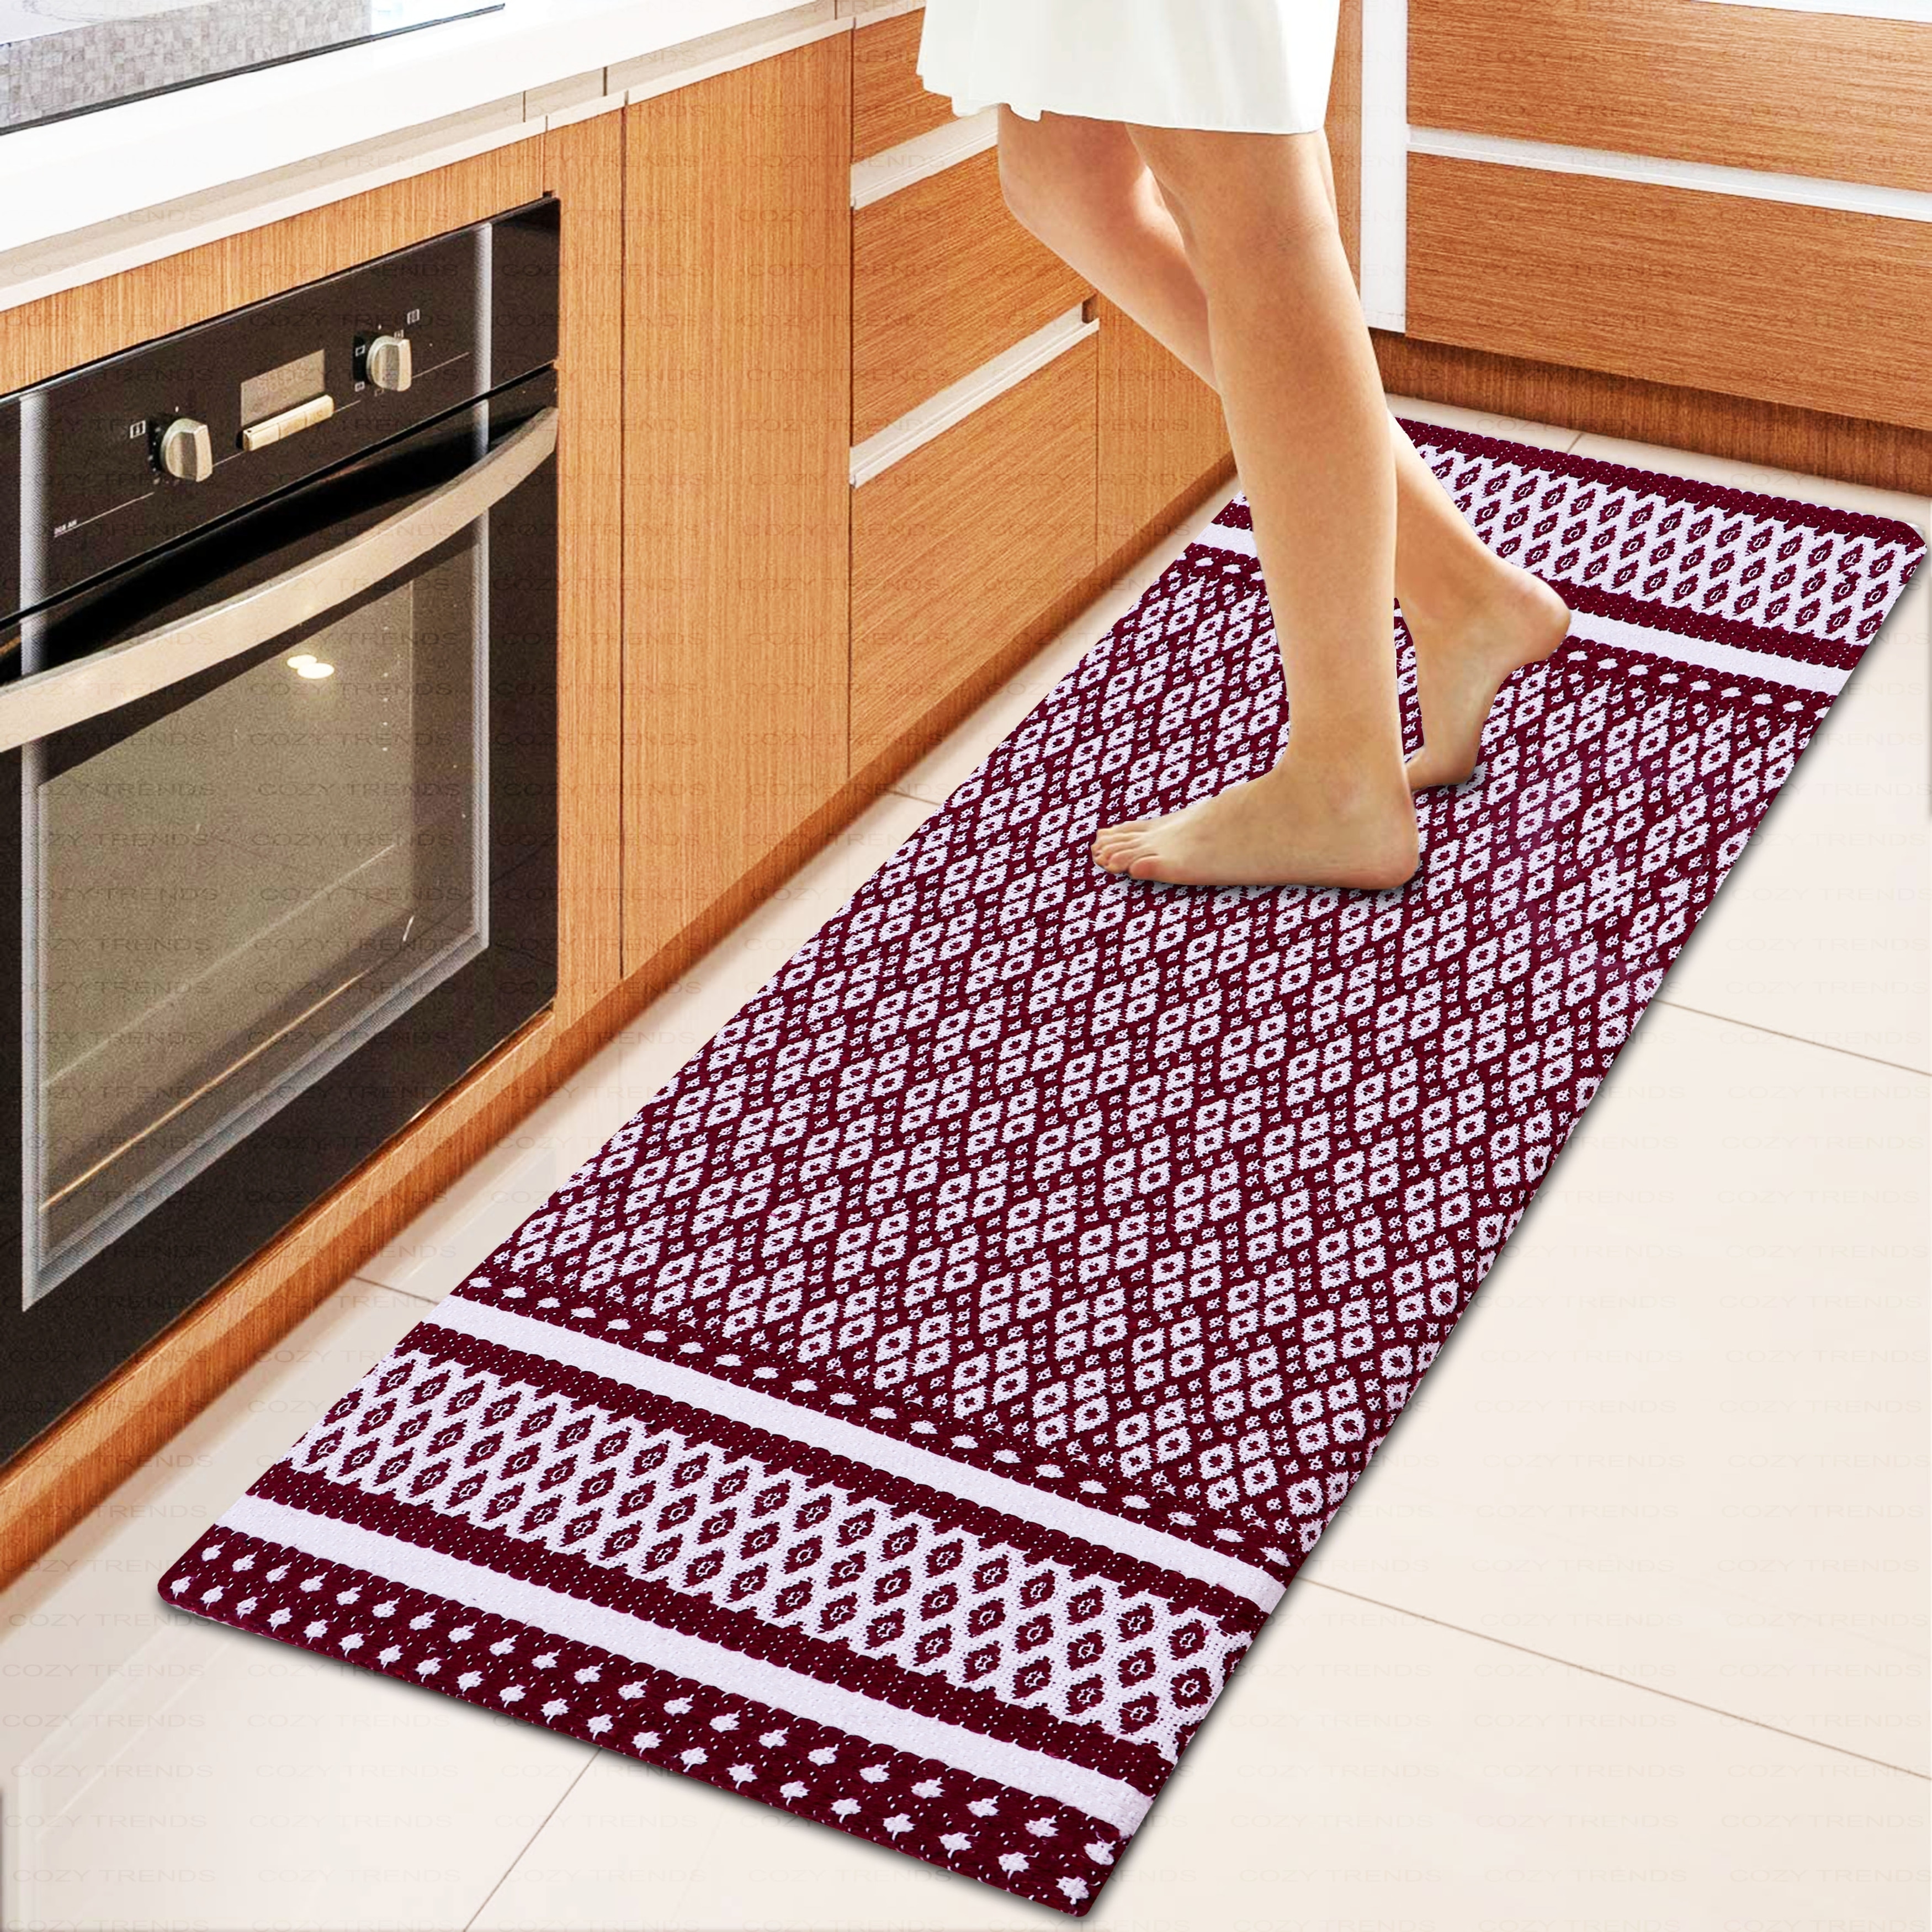 https://ak1.ostkcdn.com/images/products/is/images/direct/bb708b9ef00988476e752e9762eb3d2538c4ae85/Kitchen-Runner-Rug--Mat-Cushioned-Cotton-Hand-Woven-Anti-Fatigue-Mat-Kitchen-Bathroom-Bed-side-18x48%27%27.jpg